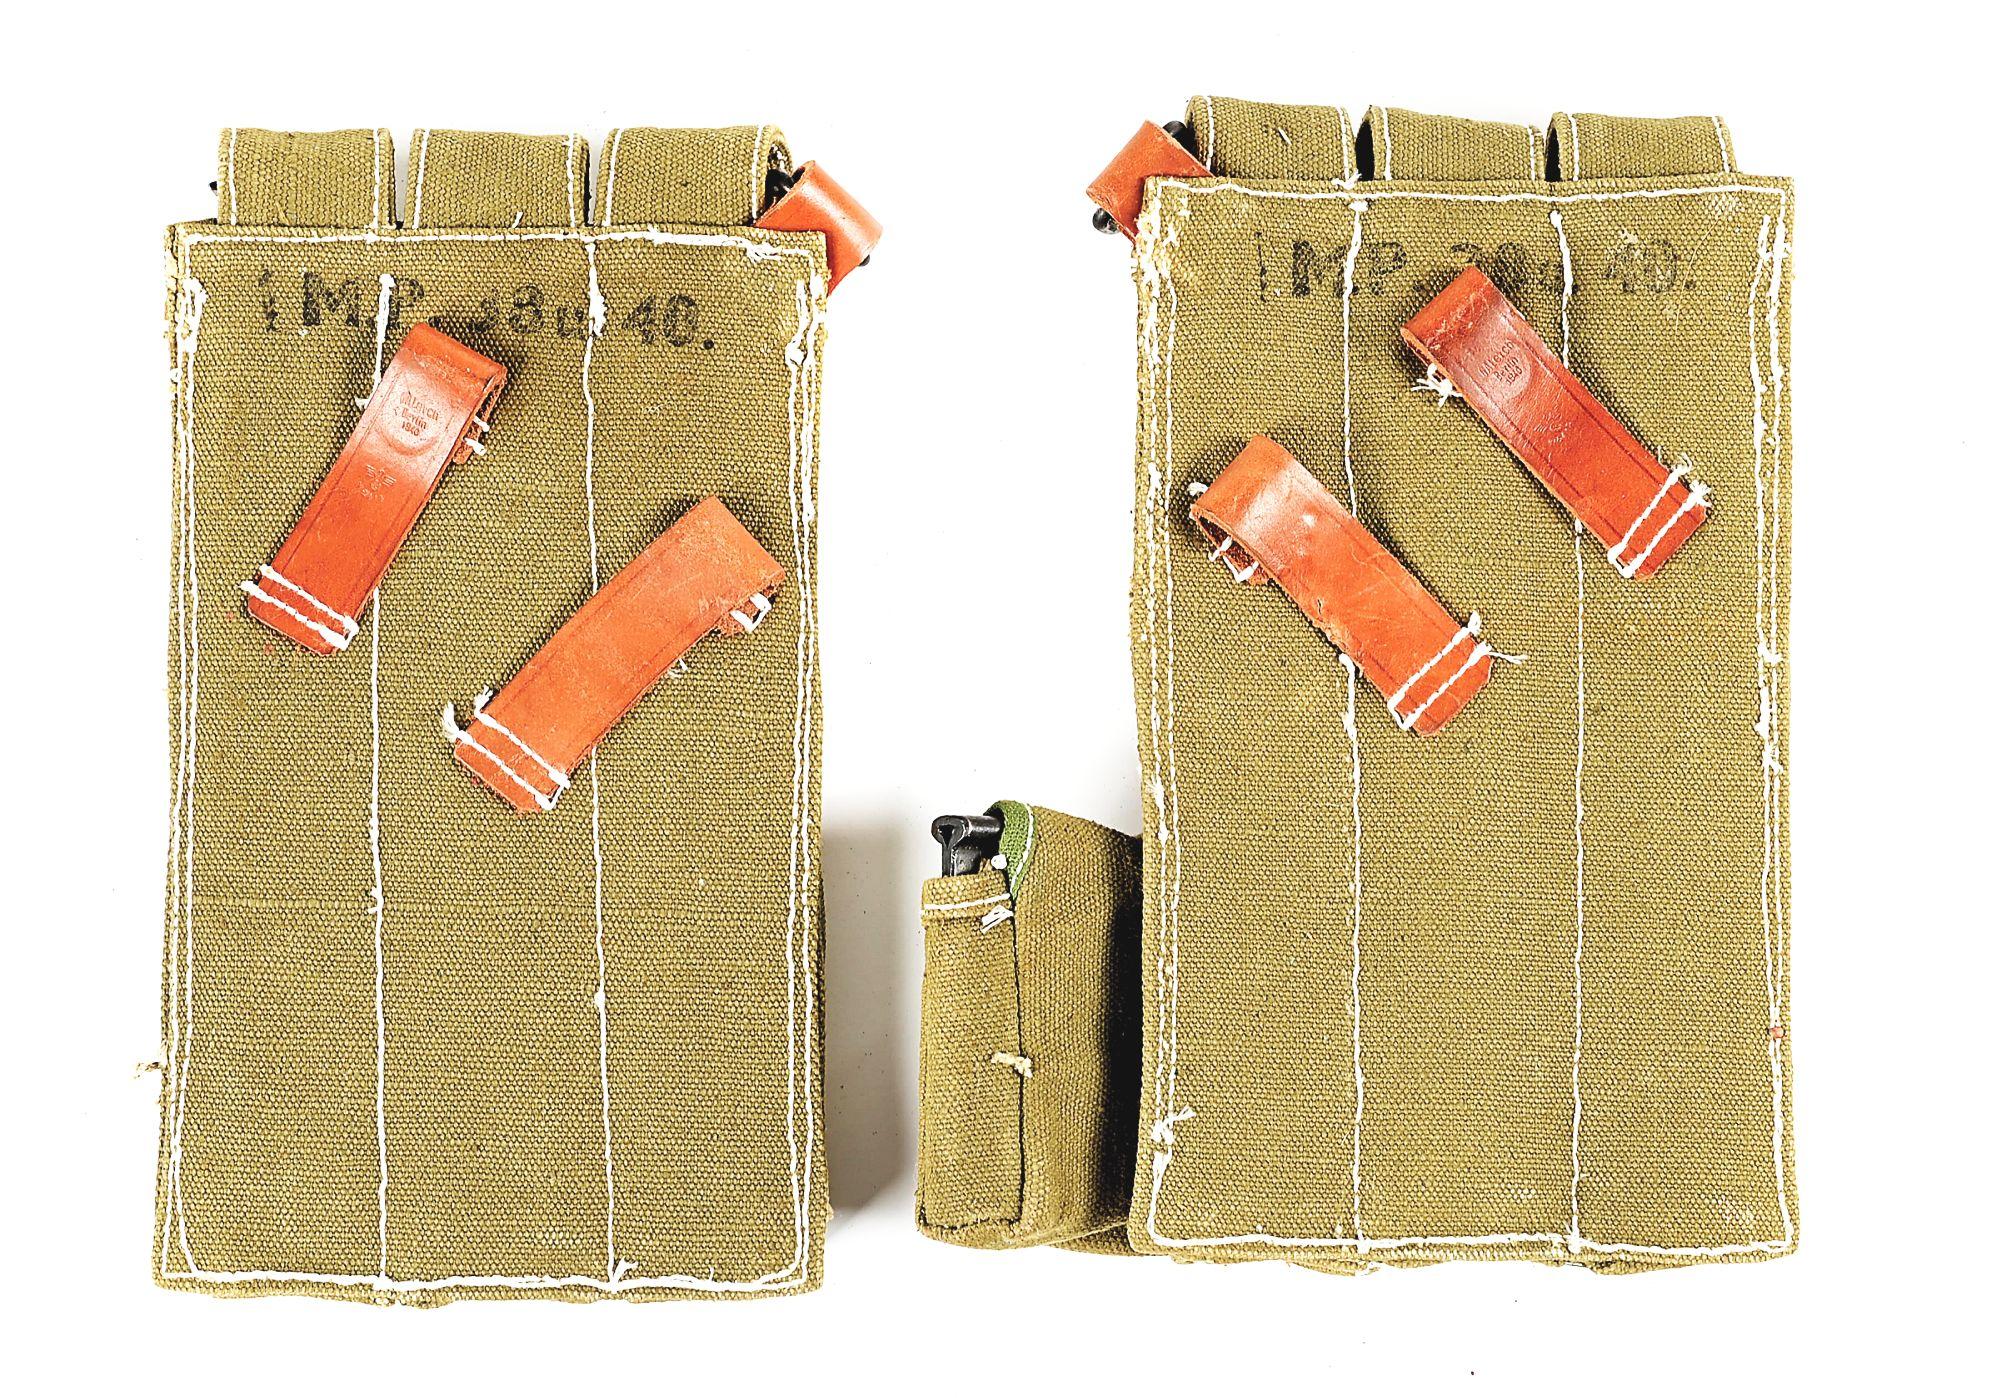 A TREASURE OF ORIGINAL MP-40 MACHINE GUN MAGAZINES, LOADERS, AND SLINGS WITH SET OF REPRODUCTION MAG